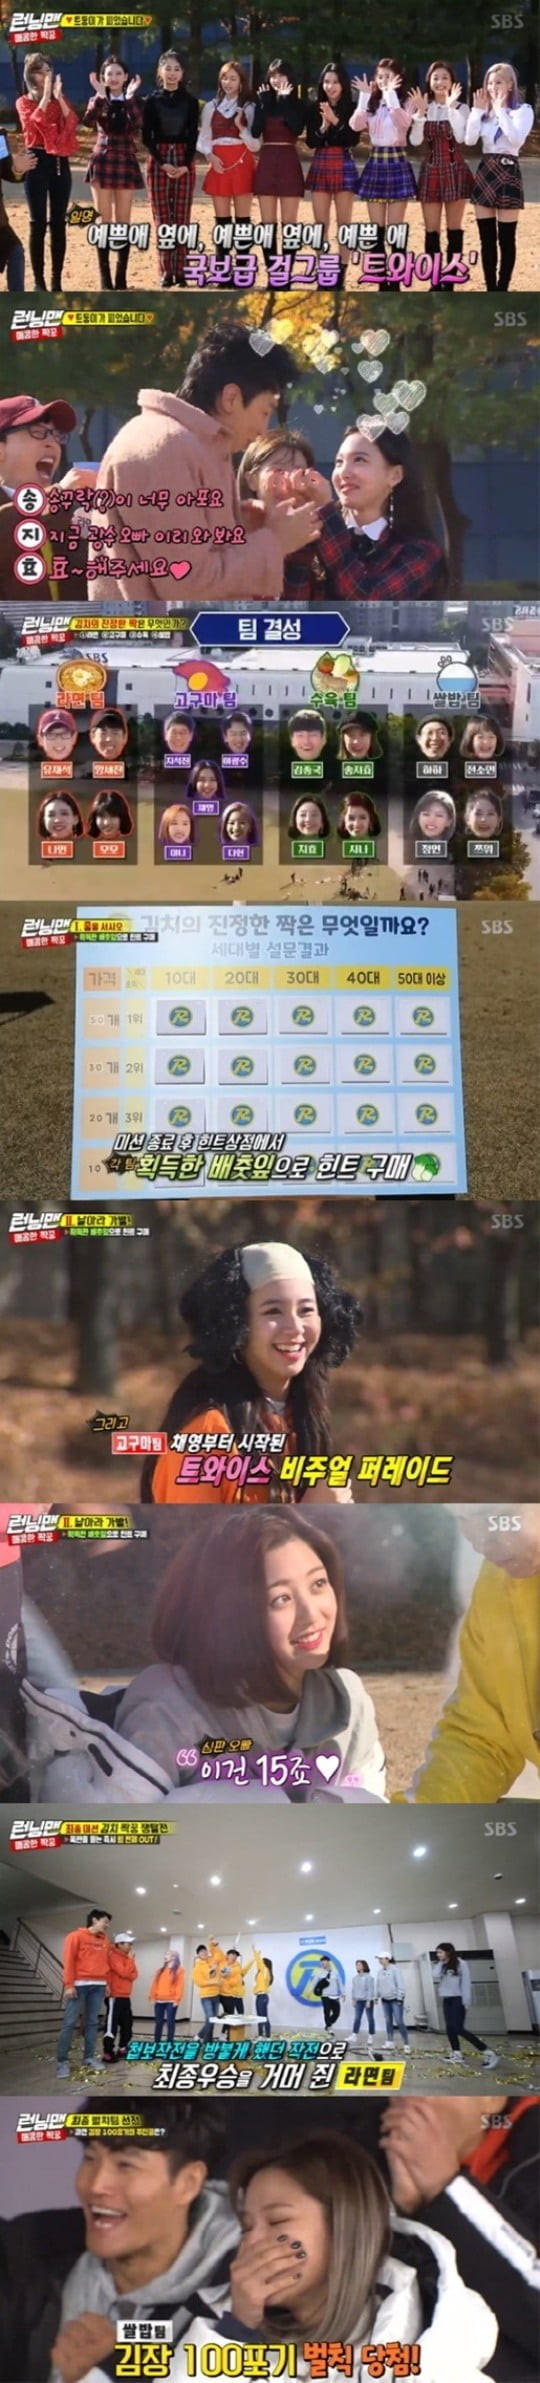 <p>SBS ‘Running Man’this unwavering 2049 target viewership in its time slot # 1.</p><p>Day 3 viewership survey Agency Nielsen Korea, according to the last 2 days of the broadcast of ‘Running Man’is the main advertising officials of the important indicators here are age 20-49 years (‘2049’) target audience 4. 5%(NCR, furniture, Part 2 viewership standard)record for the same time period, 1 ranked. Average viewership is part 1 of 5. 3%, Part 2 7. 7%(the NCR furniture viewership standards)was, per minute, with a maximum application rate of 8. Up to 8% jumped.</p><p>The kimchis true mate, find Kim most distinctive ‘spicy paired peek-a-Boo’ lace decorated in the ‘Running Man’ sister group TWICE home and by members of the acclaimed shorter. This race is a team competition with a view as if the team is Yoo Jae-Suk, Yang and more as well, Momo, I smoke, and every team in the Suk Jin, Lee Kwang-soo, Chae, Mina, Implementation, Training, Team Kim Jong Kook, Song JI Hyo,, Hyo, Rice team in that one, small, square, Richardson sub divided into.</p><p>Each team has a ‘line’ through the game fierce confrontation unfolded, the team, the academic team, and each team, each 1 win by handing out the hints acquired, and Round 2 of the ‘fly! The wig-switching in the potato team and if the team is 1 for, 2 for to or once the hint is acquired.</p><p>The last final round that the menu is attached to the name tag off of the menu when you exchange, while a bomb attached to the name tags off team the power is out, and the menu until the opponent beyond the ‘Star race’began. Ago min is Lee Kwang-soos name tag off, but Lee Kwang-soo is a bomb, this Rice team is the power being out face. Water and water our father, and our exchange in La, teams info to start up, expand, and ‘kimchis true even’exclaim the headquarters seat and headed towards, training, team support available to the team or the name of the tag off as when I smoke “then”and cry victory.</p><p>Meanwhile Kim 100 give Driving Cycle penalty for the uncle in the game Rice team of the square ‘shit son’, born and penalties in winning was and this scene is up to 8. 8%jump in the ‘best 1 minute’.</p>